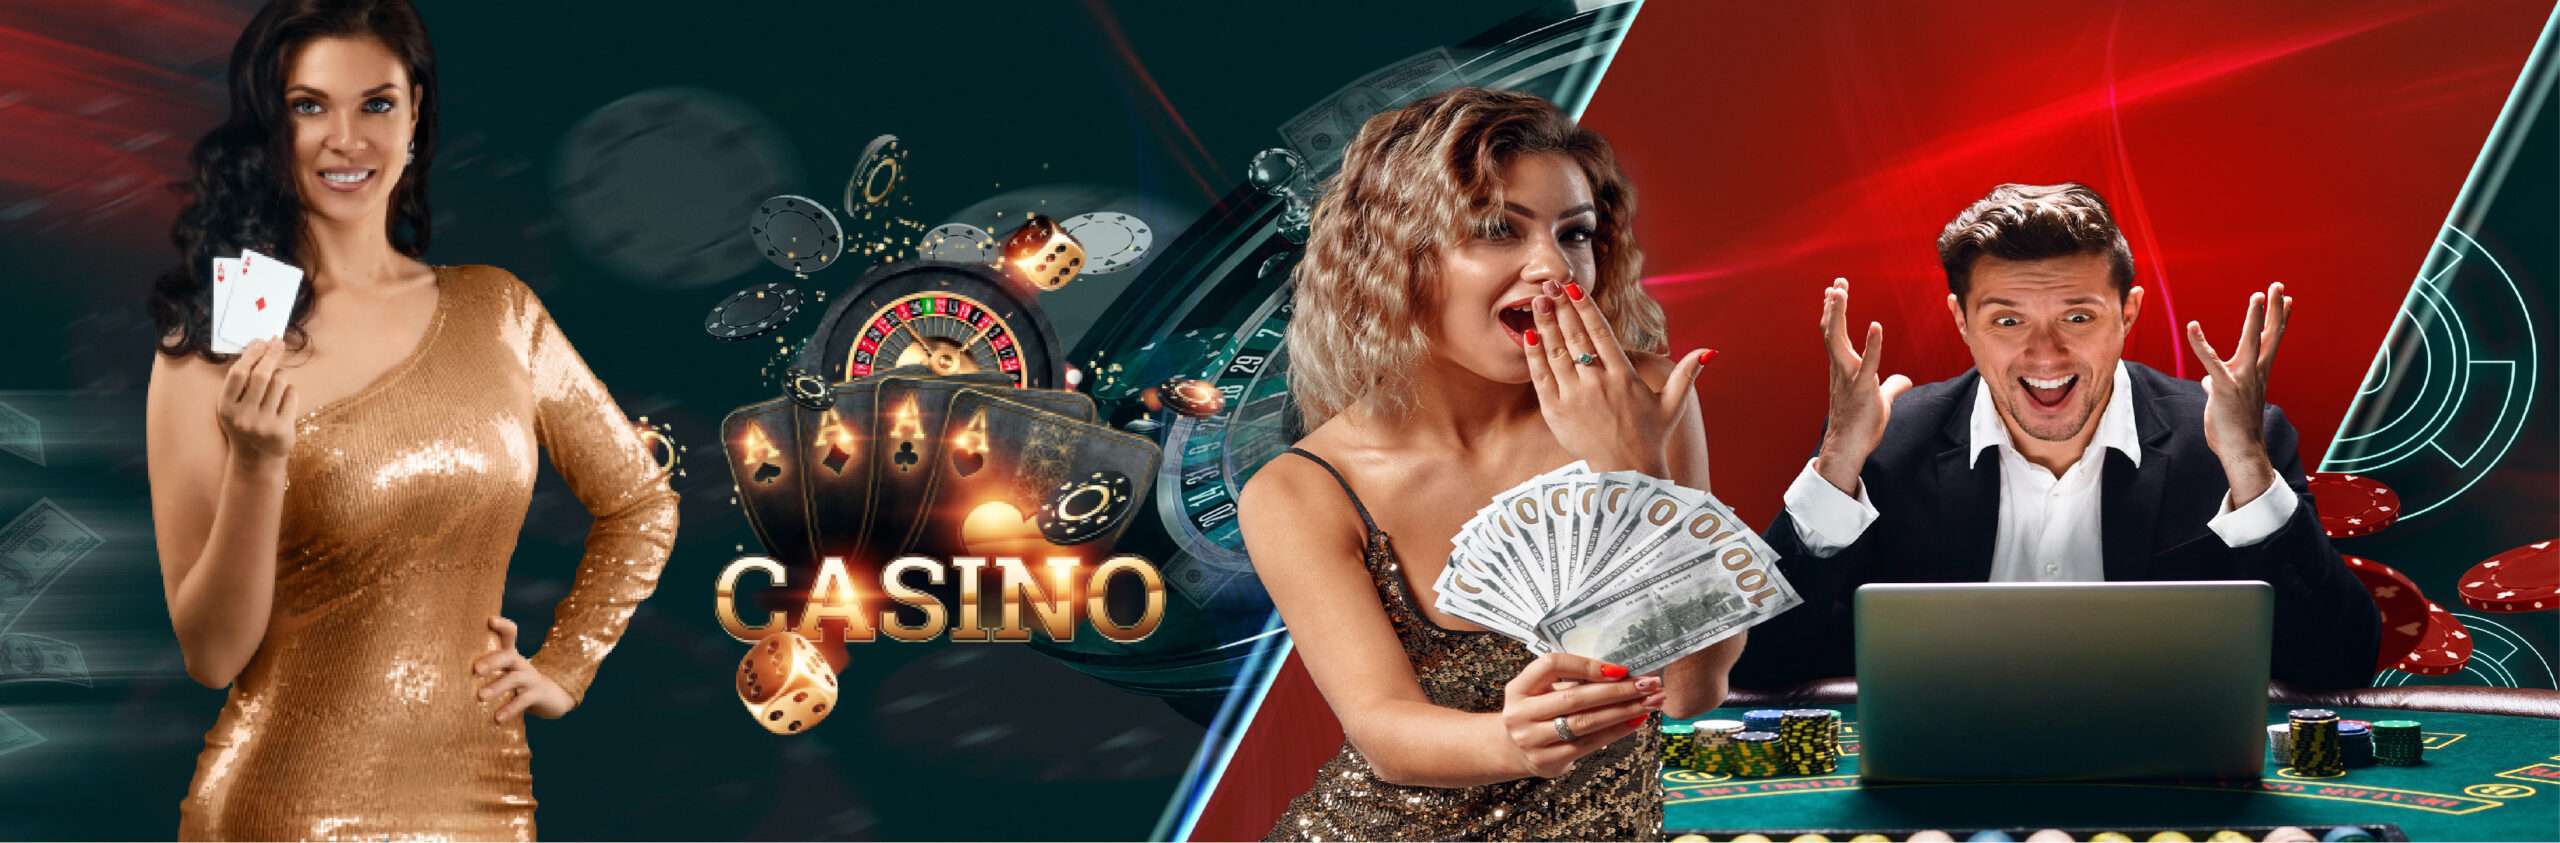 casino-banner-01-scaled